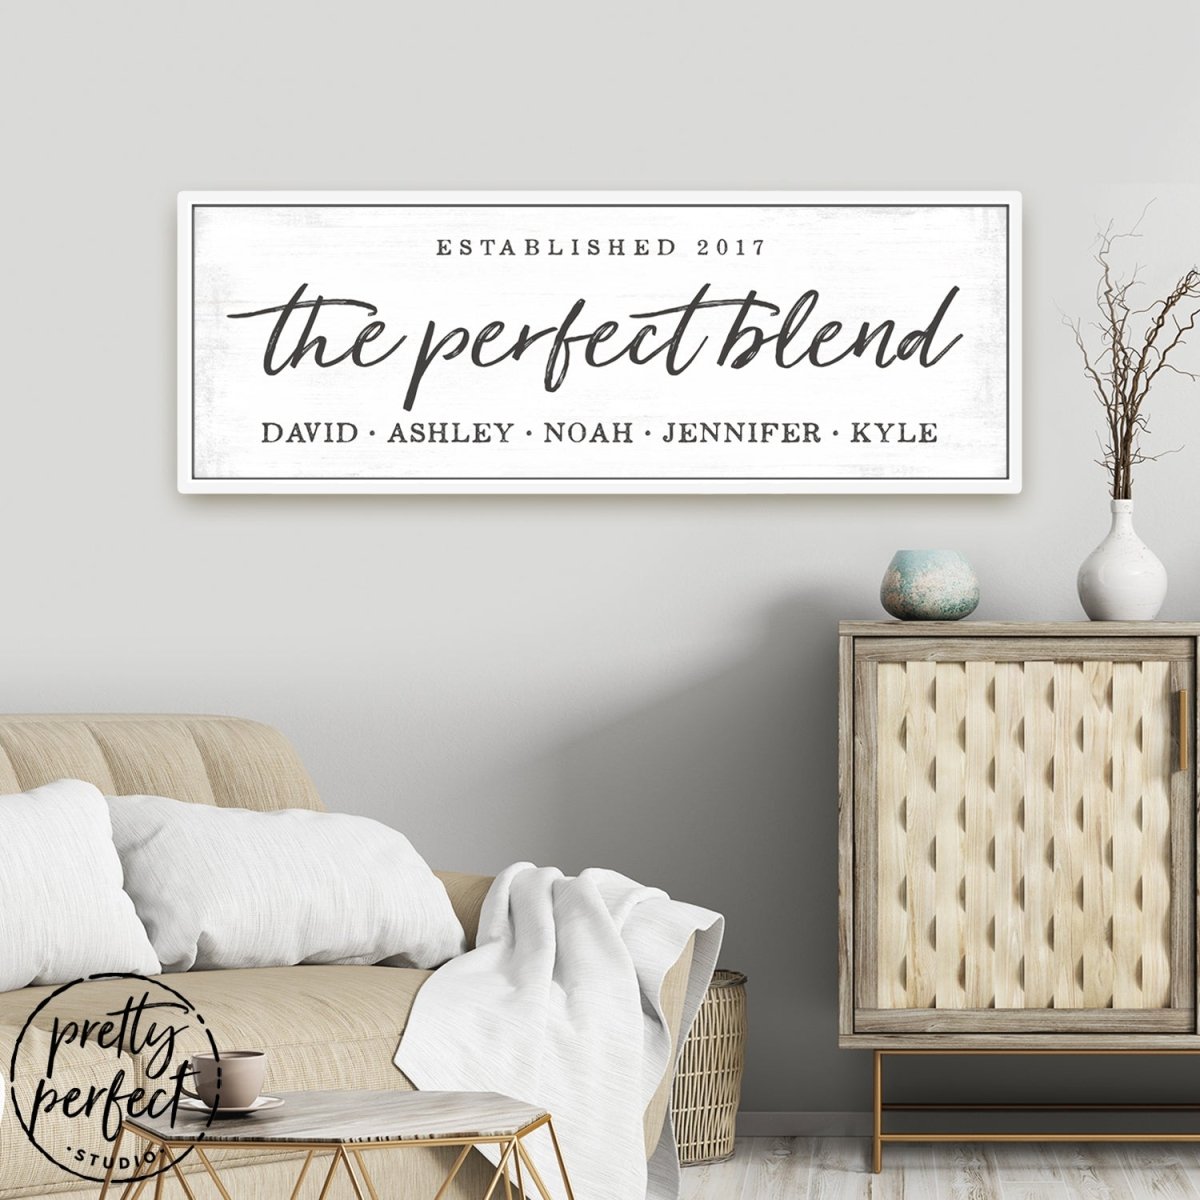 The Perfect Blend Personalized Family Name Sign in Living Room - Pretty Perfect Studio